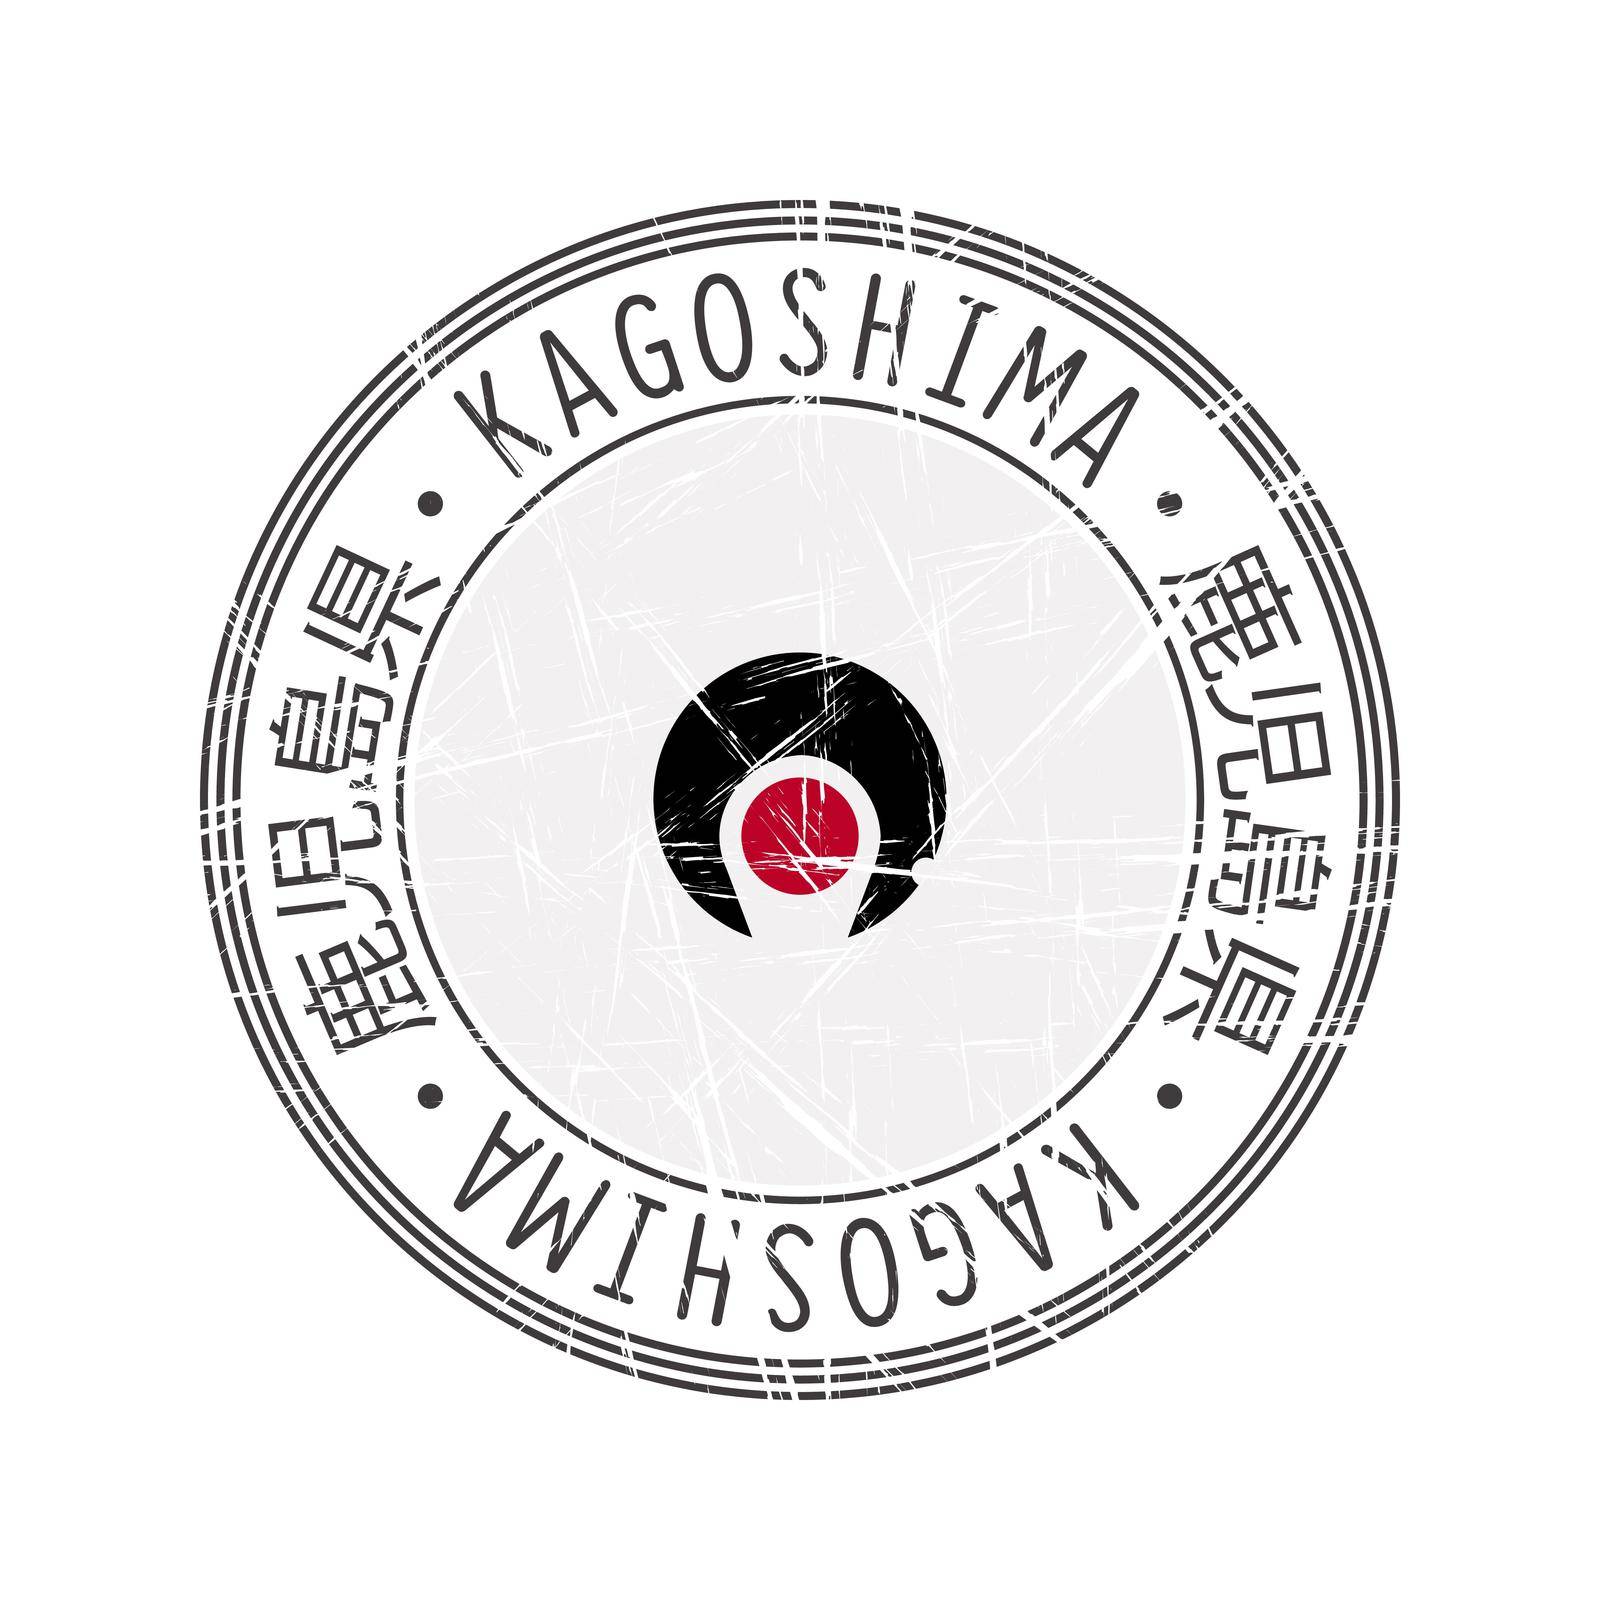 Kagoshima Prefecture rubber stamp by Lirch